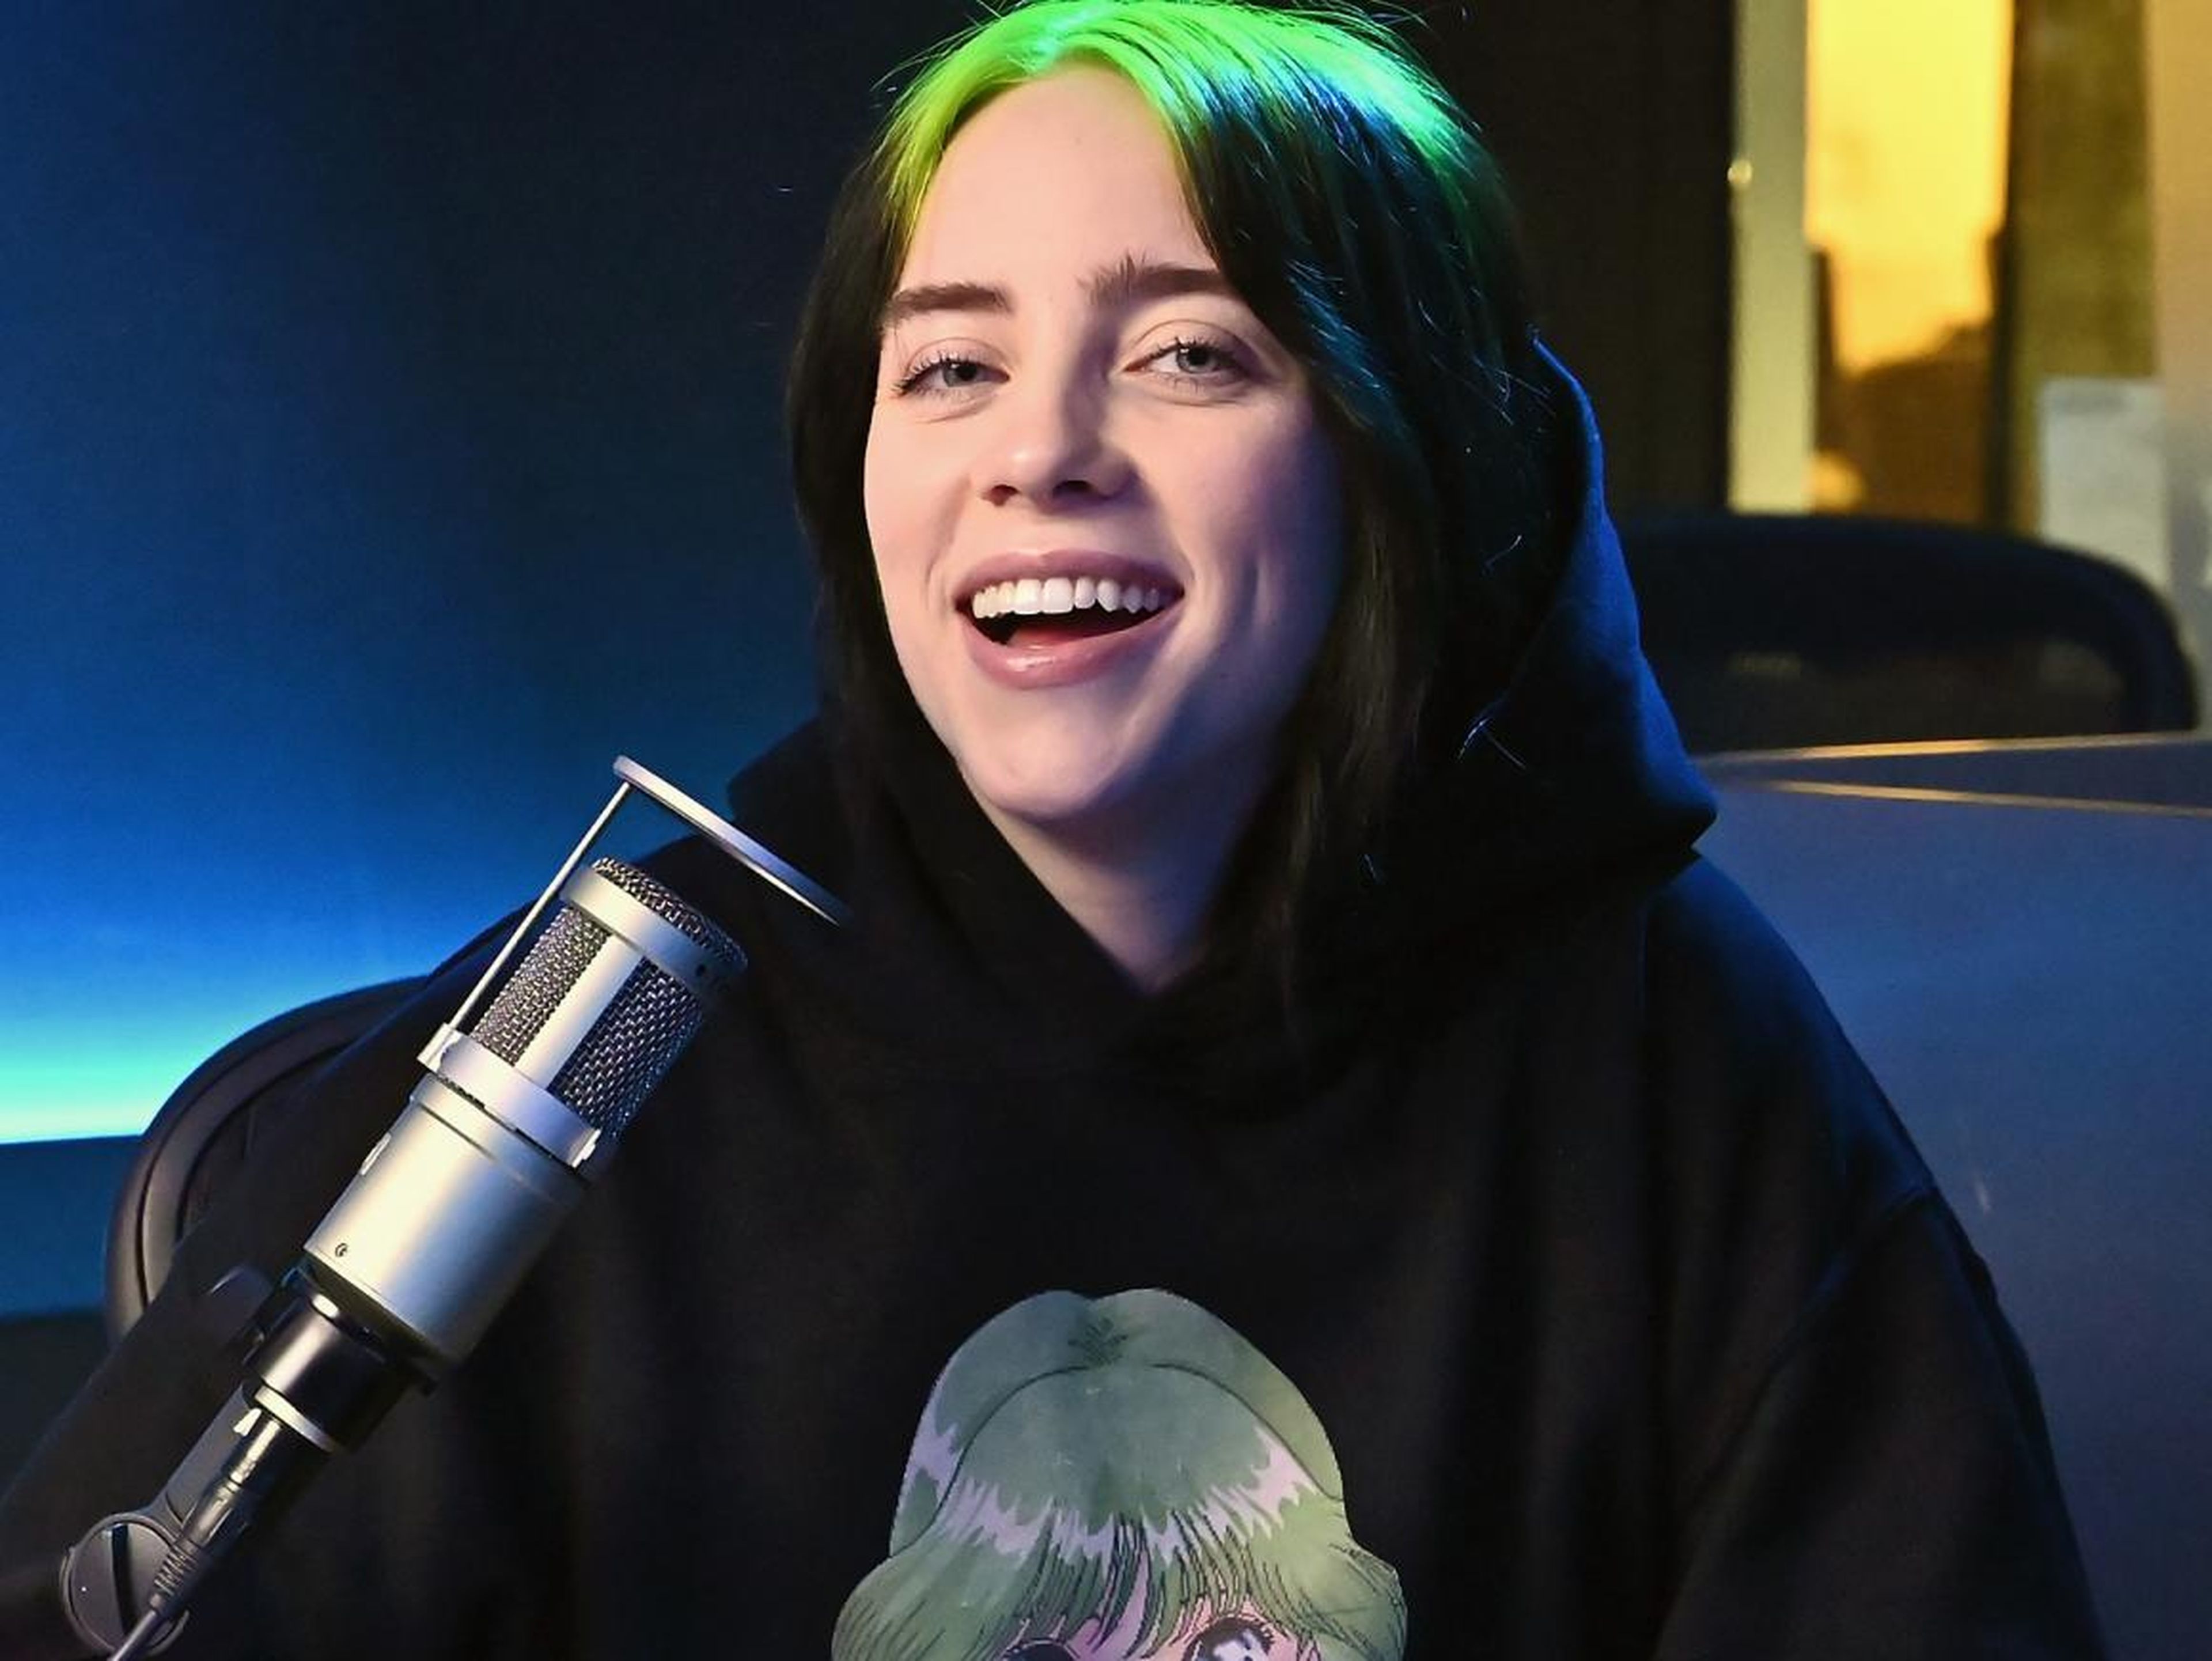 Billie Eilish's "When We All Fall Asleep, Where Do We Go?" was released in March 2019.